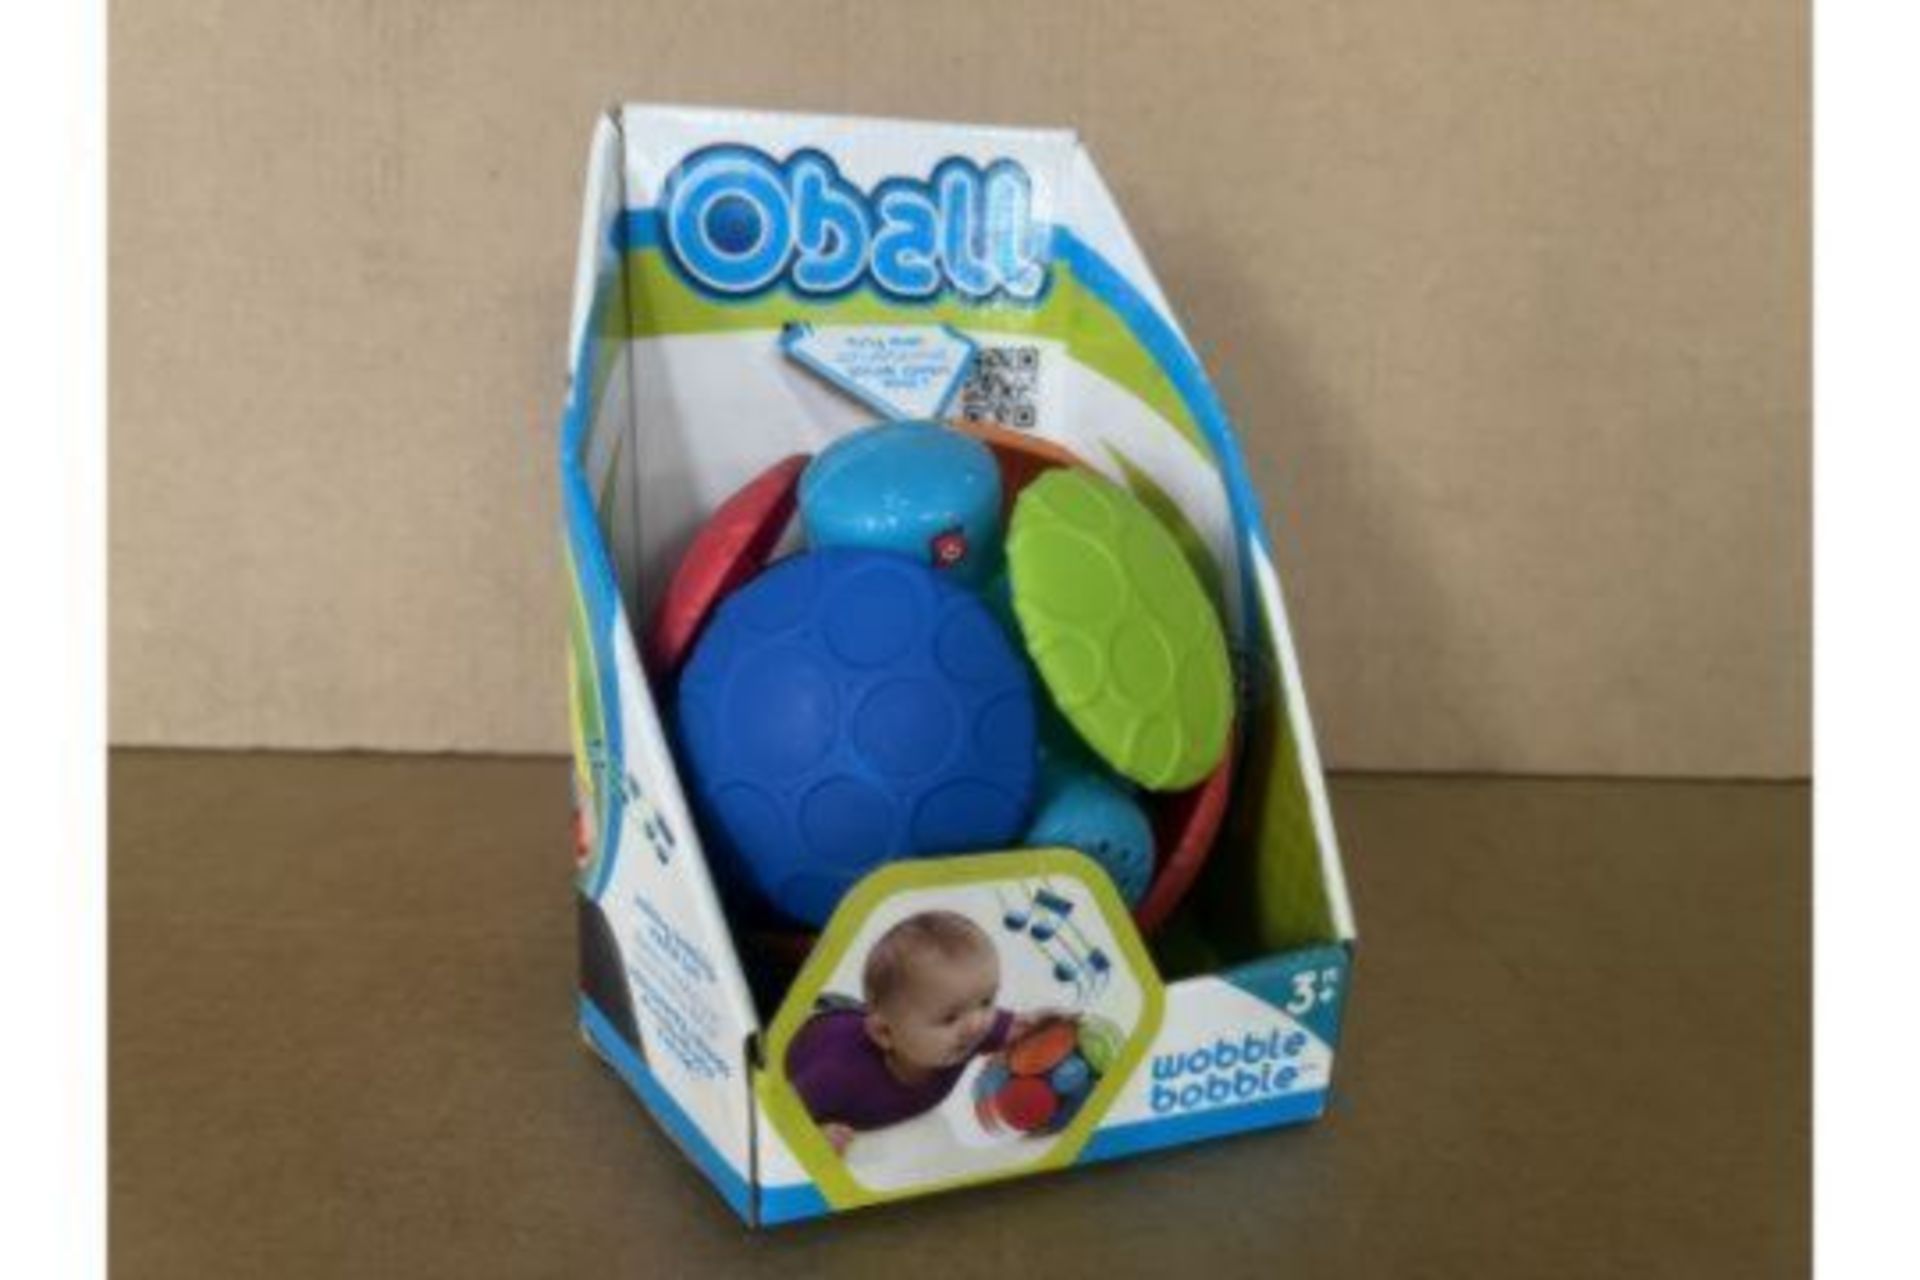 12 X BRAND NEW OBALL WOBBLE BOBBLE EDUCATIONAL TOYS IN 2 BOXES R15